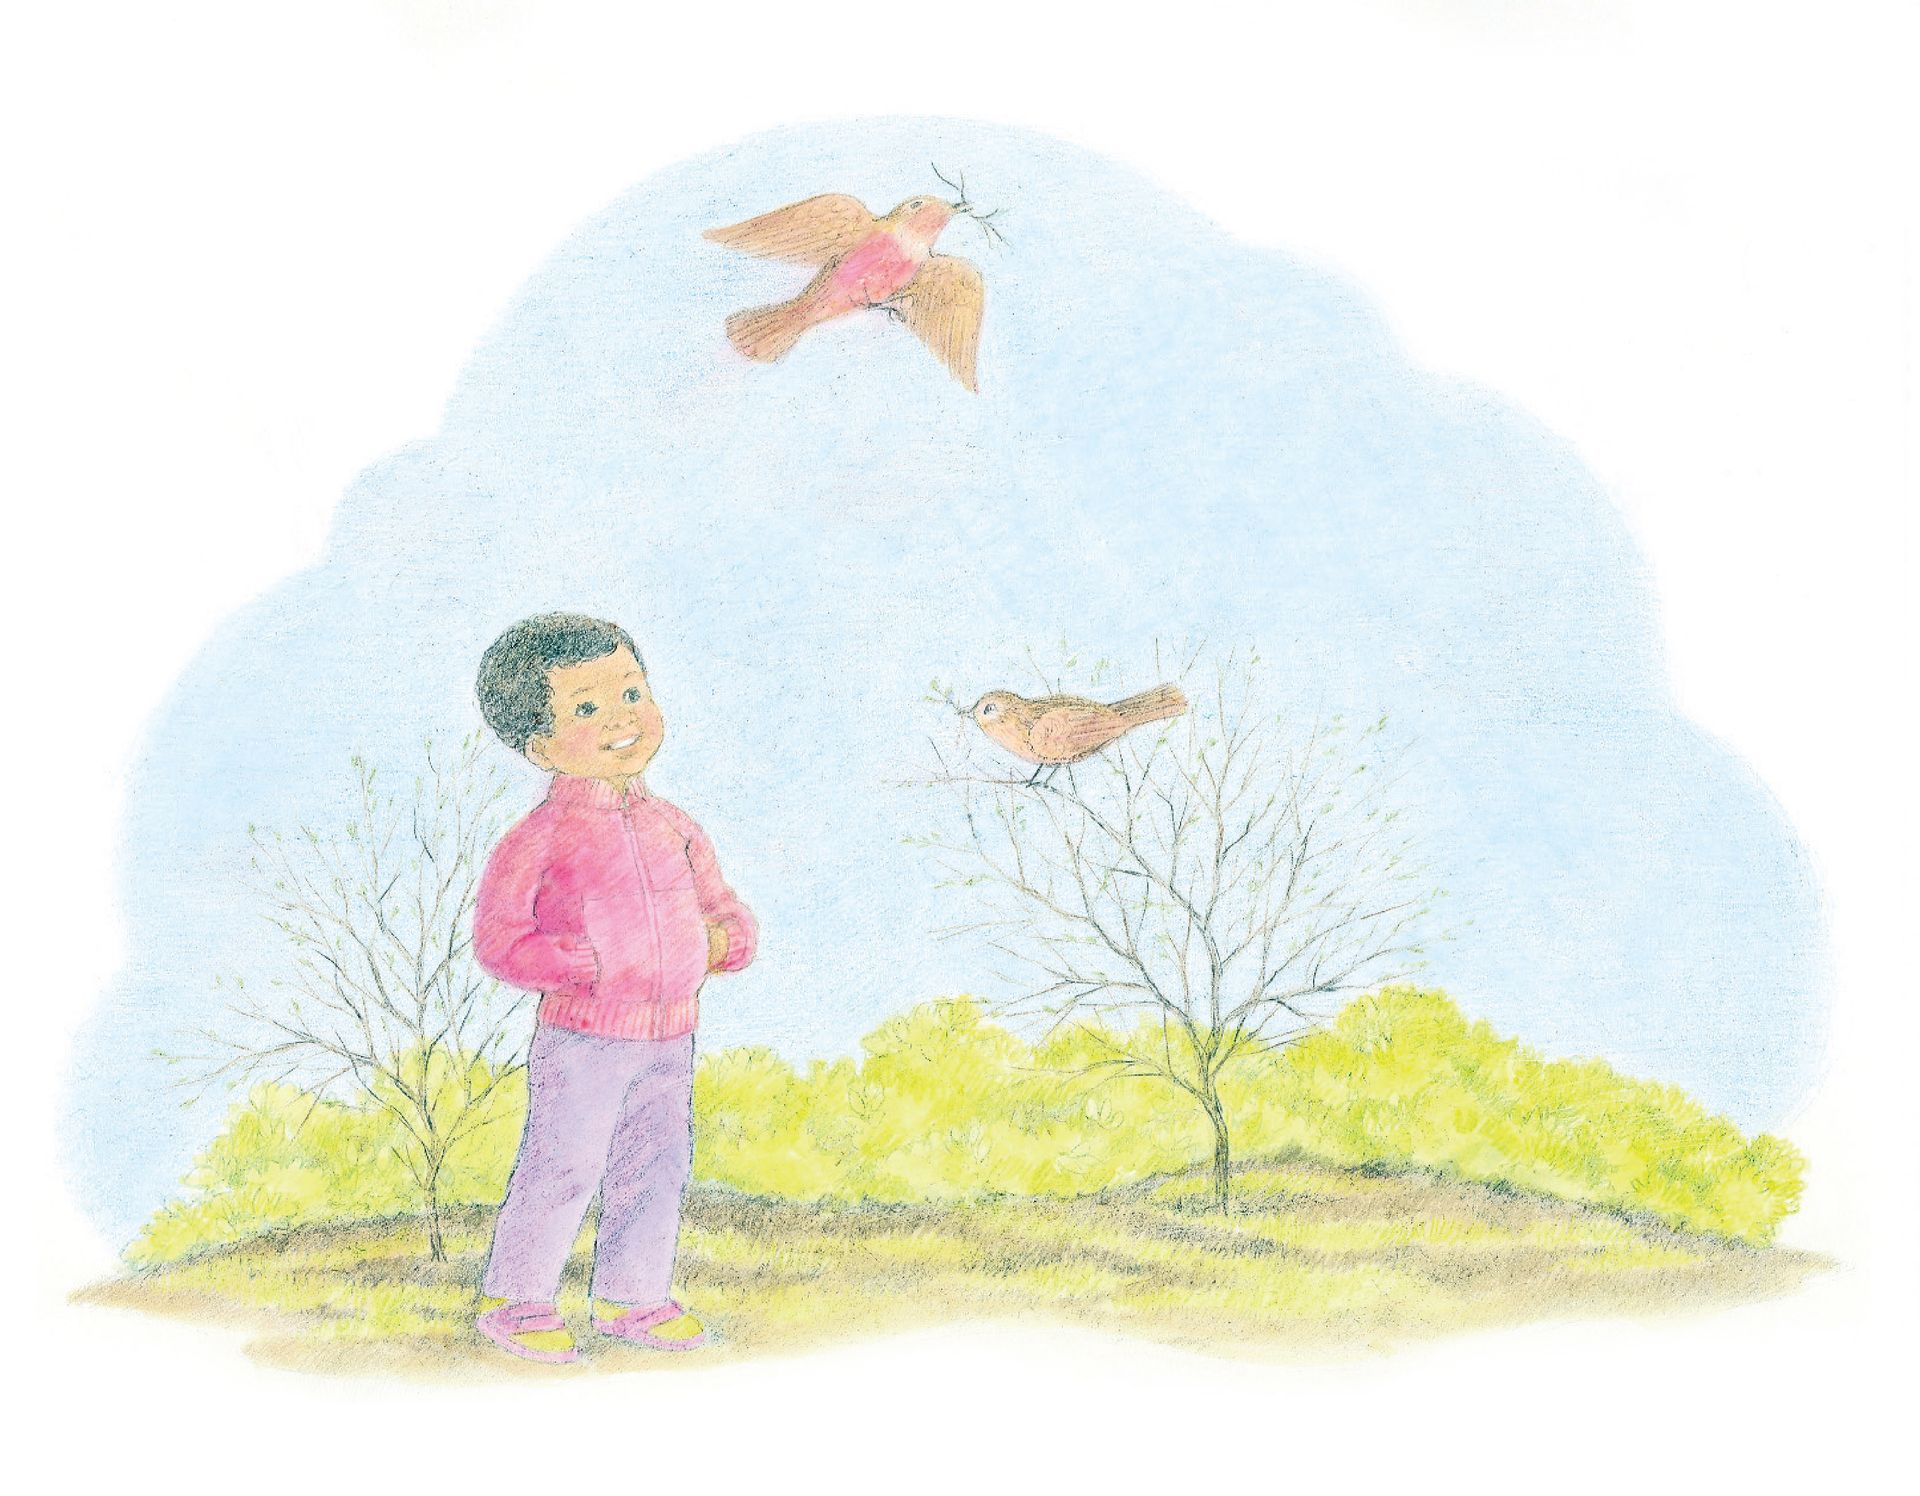 A boy in a jacket watching a bird flying above. From the Children’s Songbook, page 238, “Springtime Is Coming”; watercolor illustration by Virginia Sargent.